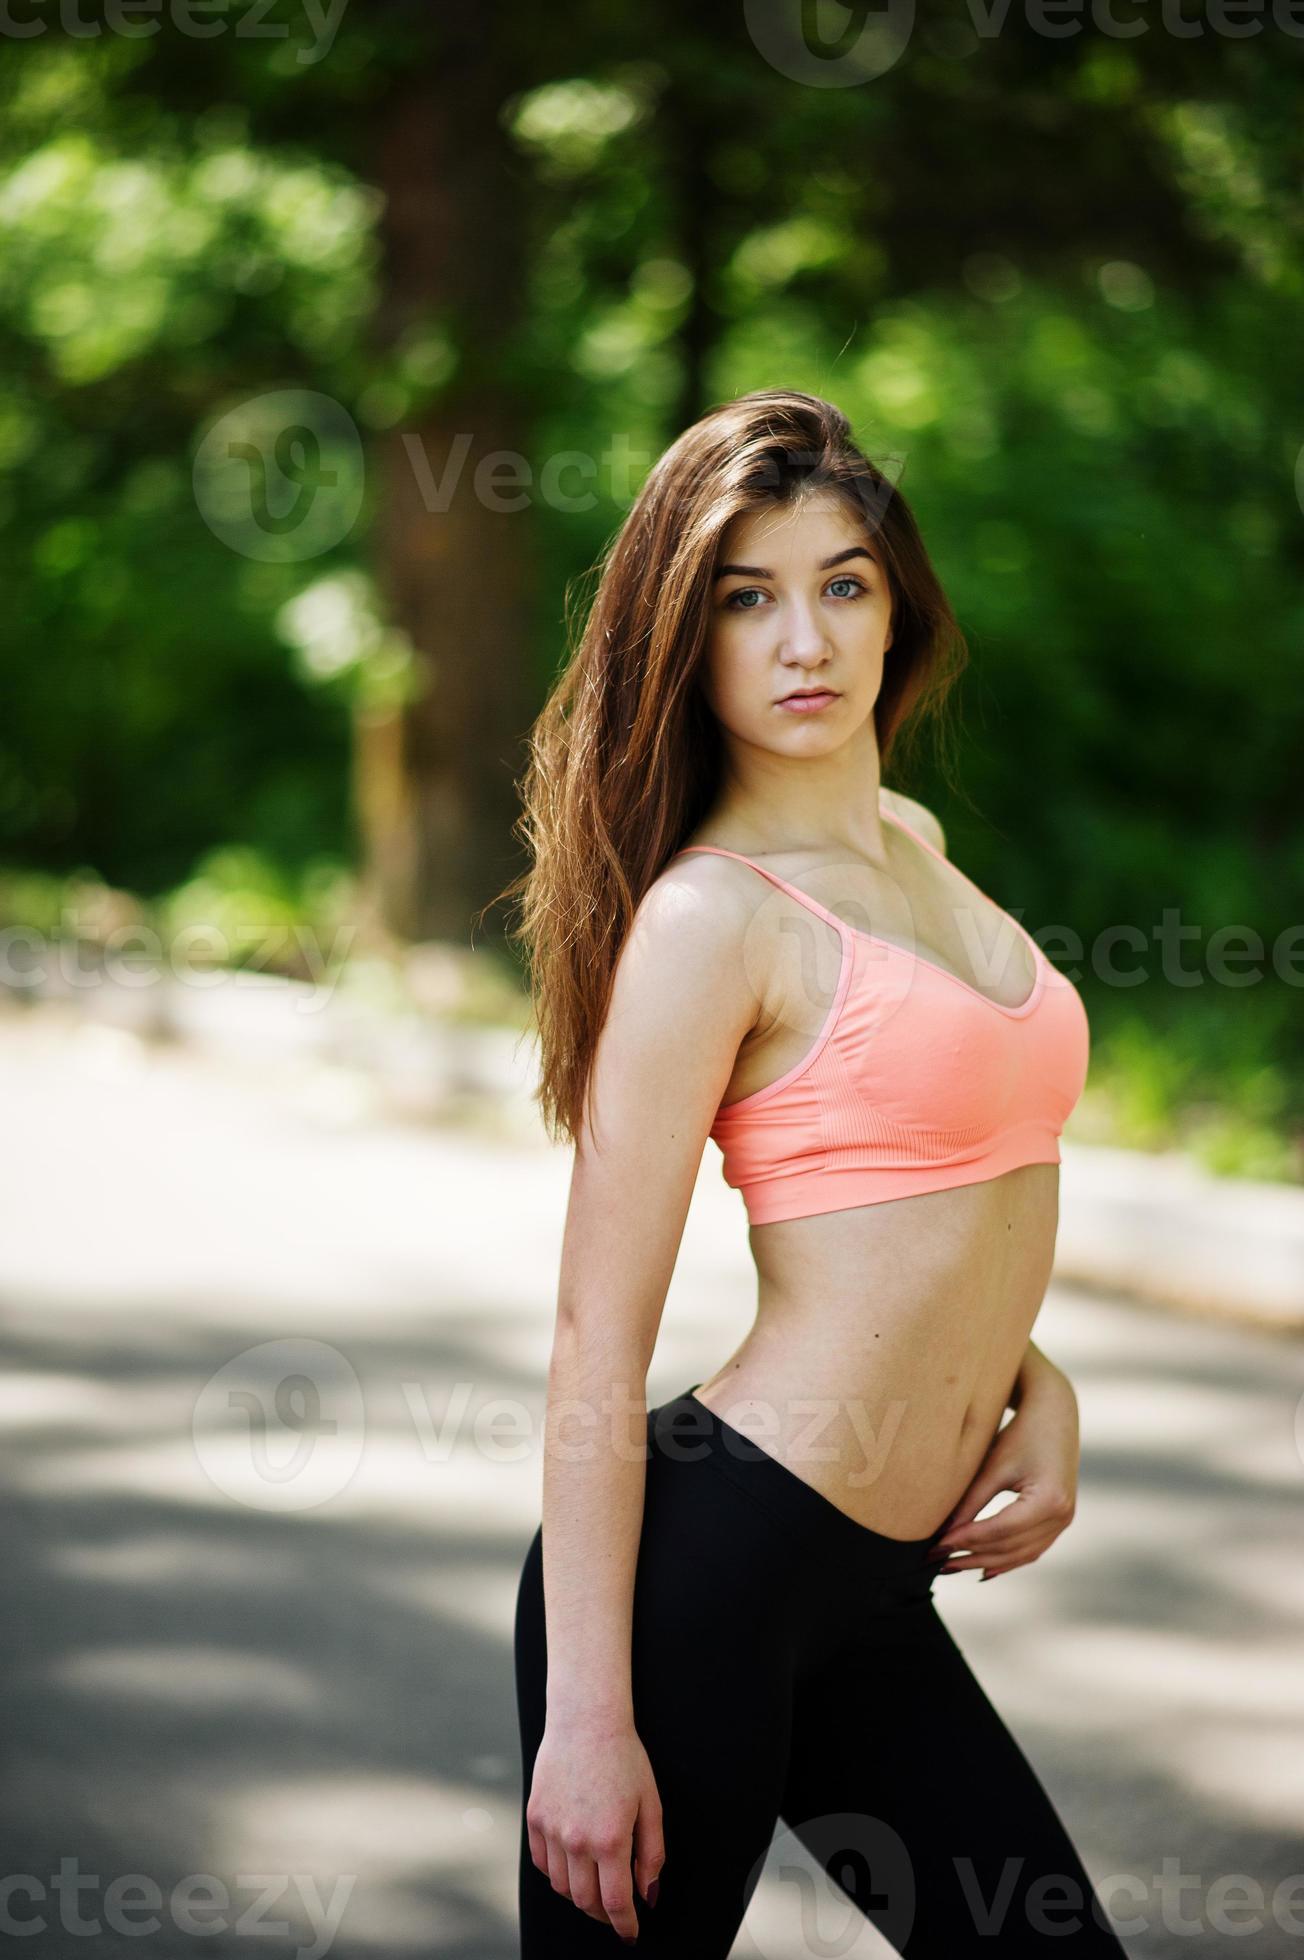 https://static.vecteezy.com/system/resources/previews/007/219/070/large_2x/fitness-slim-sexy-sport-girl-in-sportswear-posed-in-road-at-park-outdoor-sports-urban-style-photo.jpg